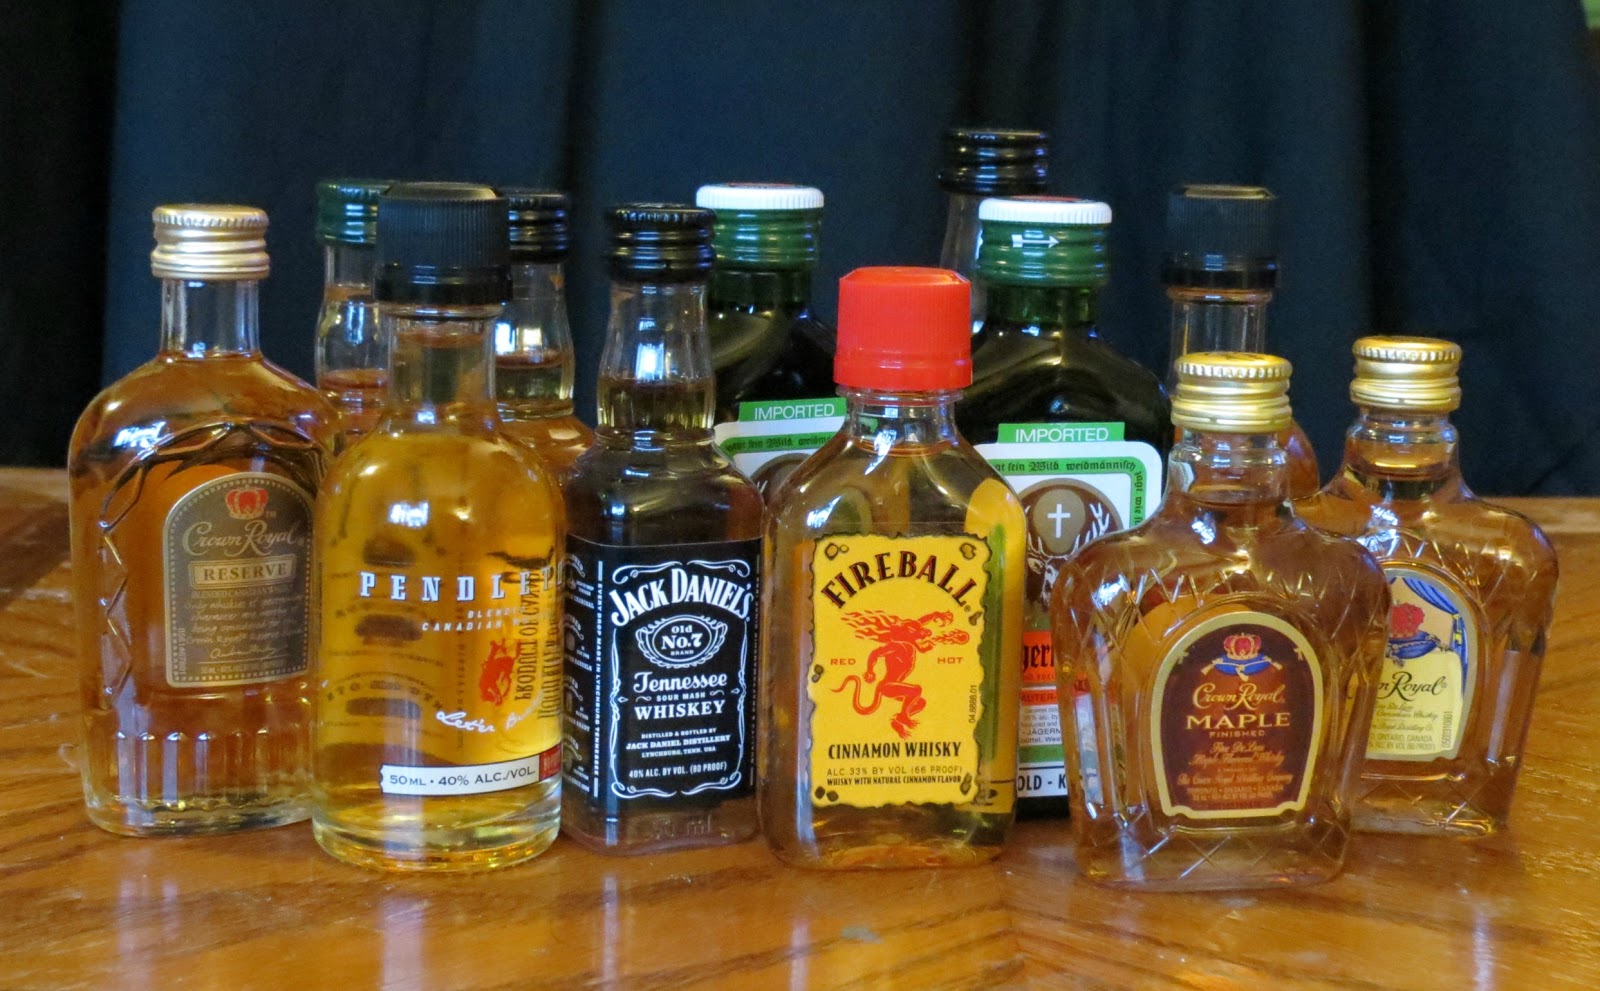 18. Small bottles of alchohol are alowed on plane